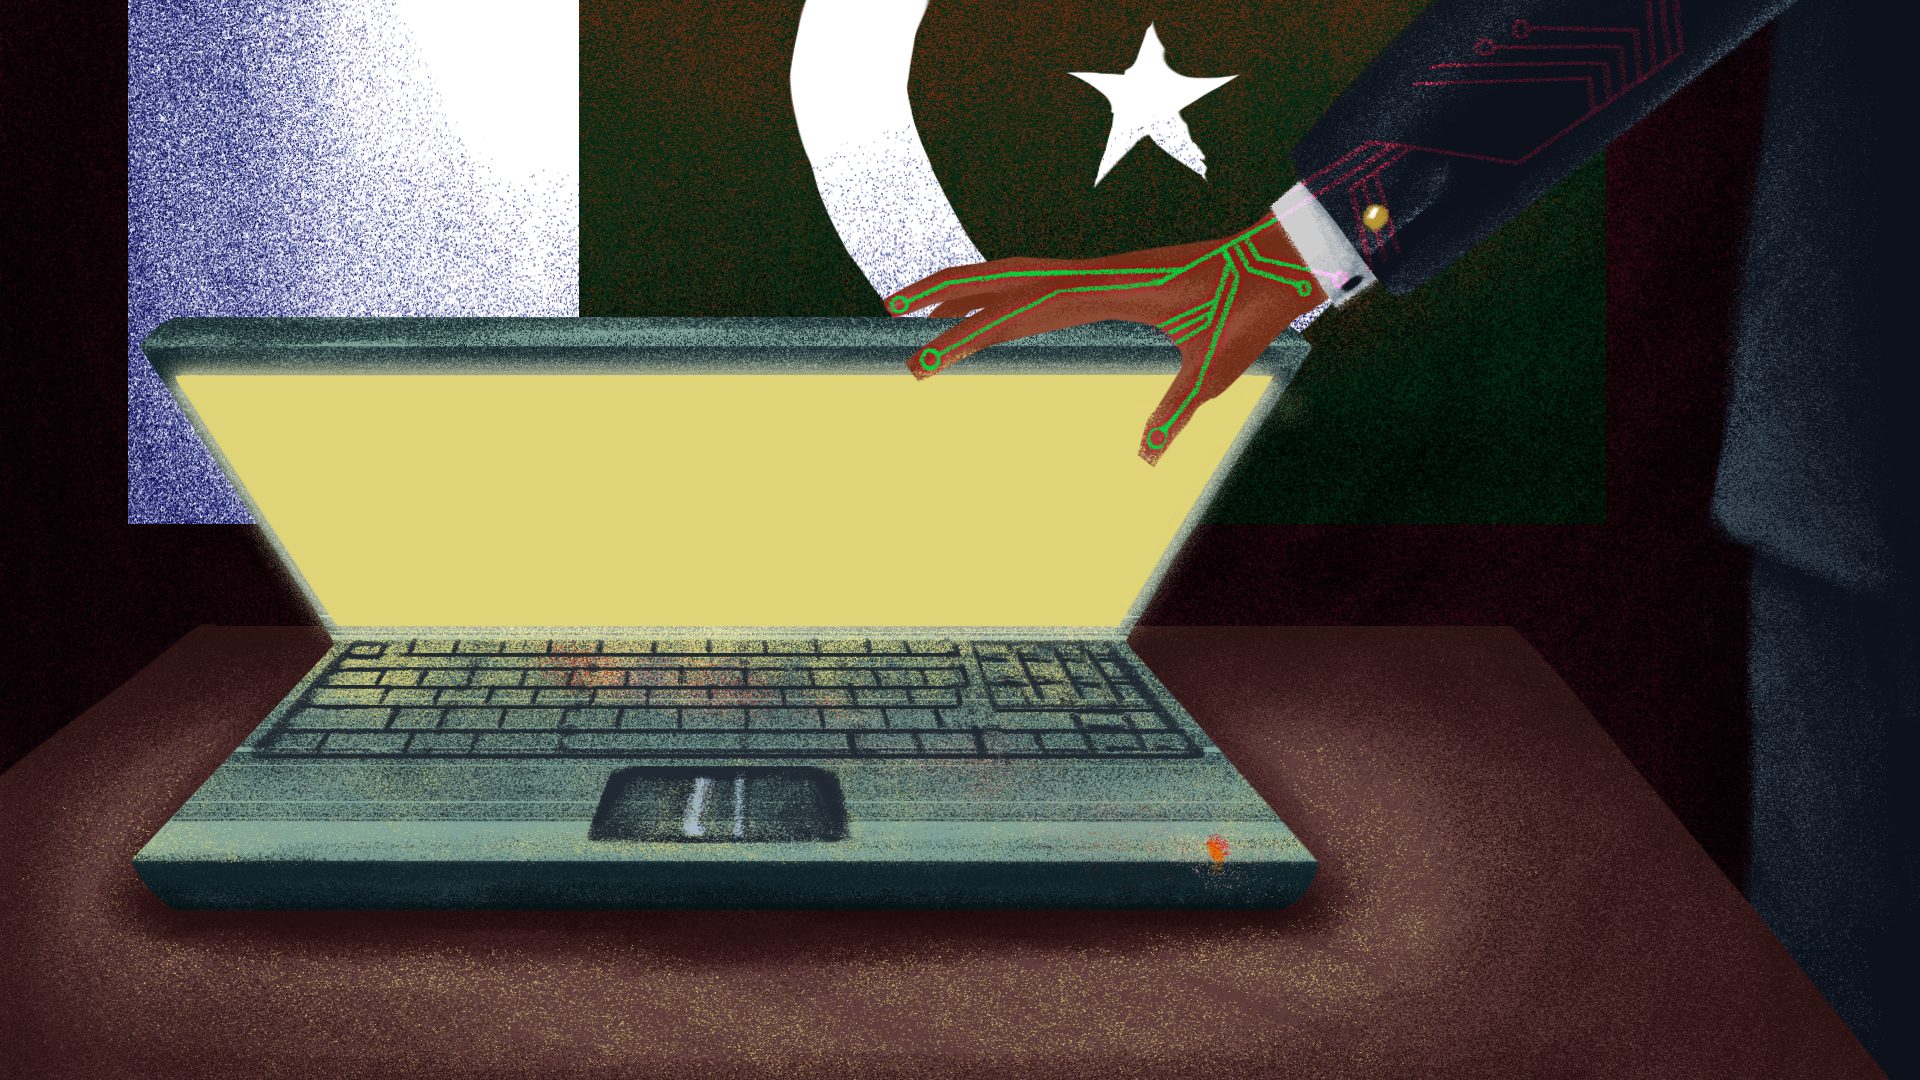 Banned or blocked: Pakistan pushes Silicon Valley for more censorship